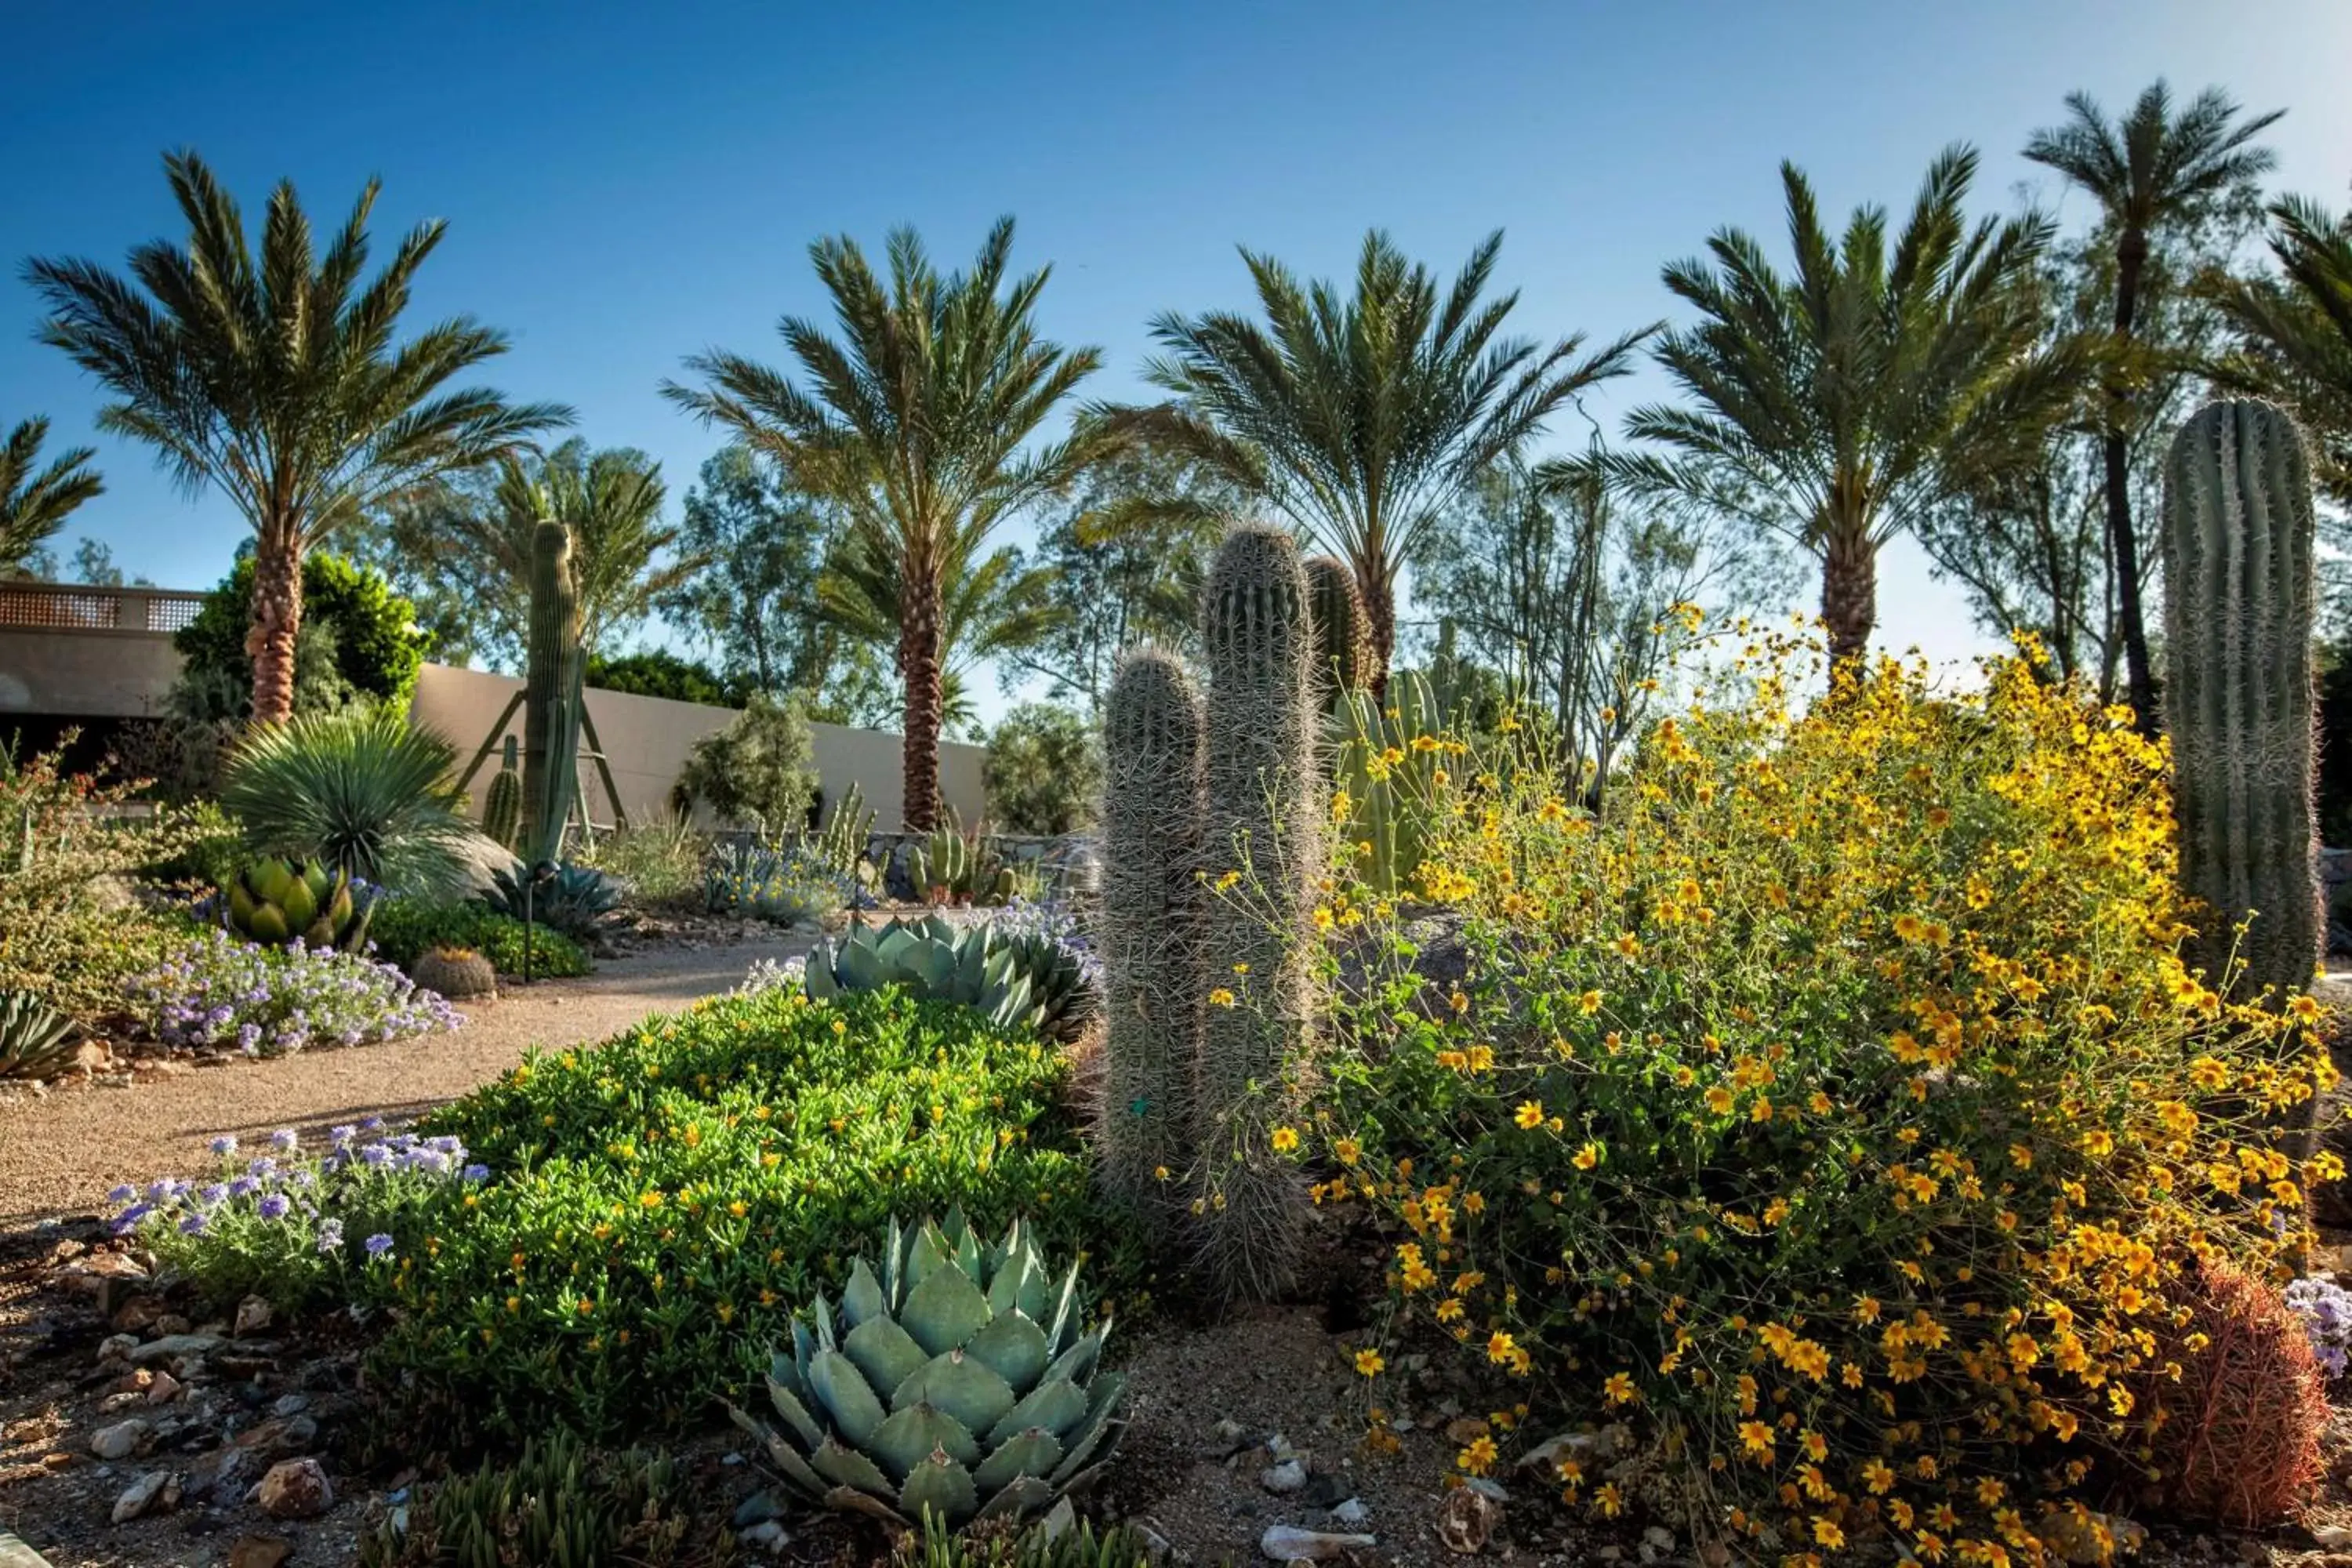 Property building, Garden in The Scottsdale Resort at McCormick Ranch